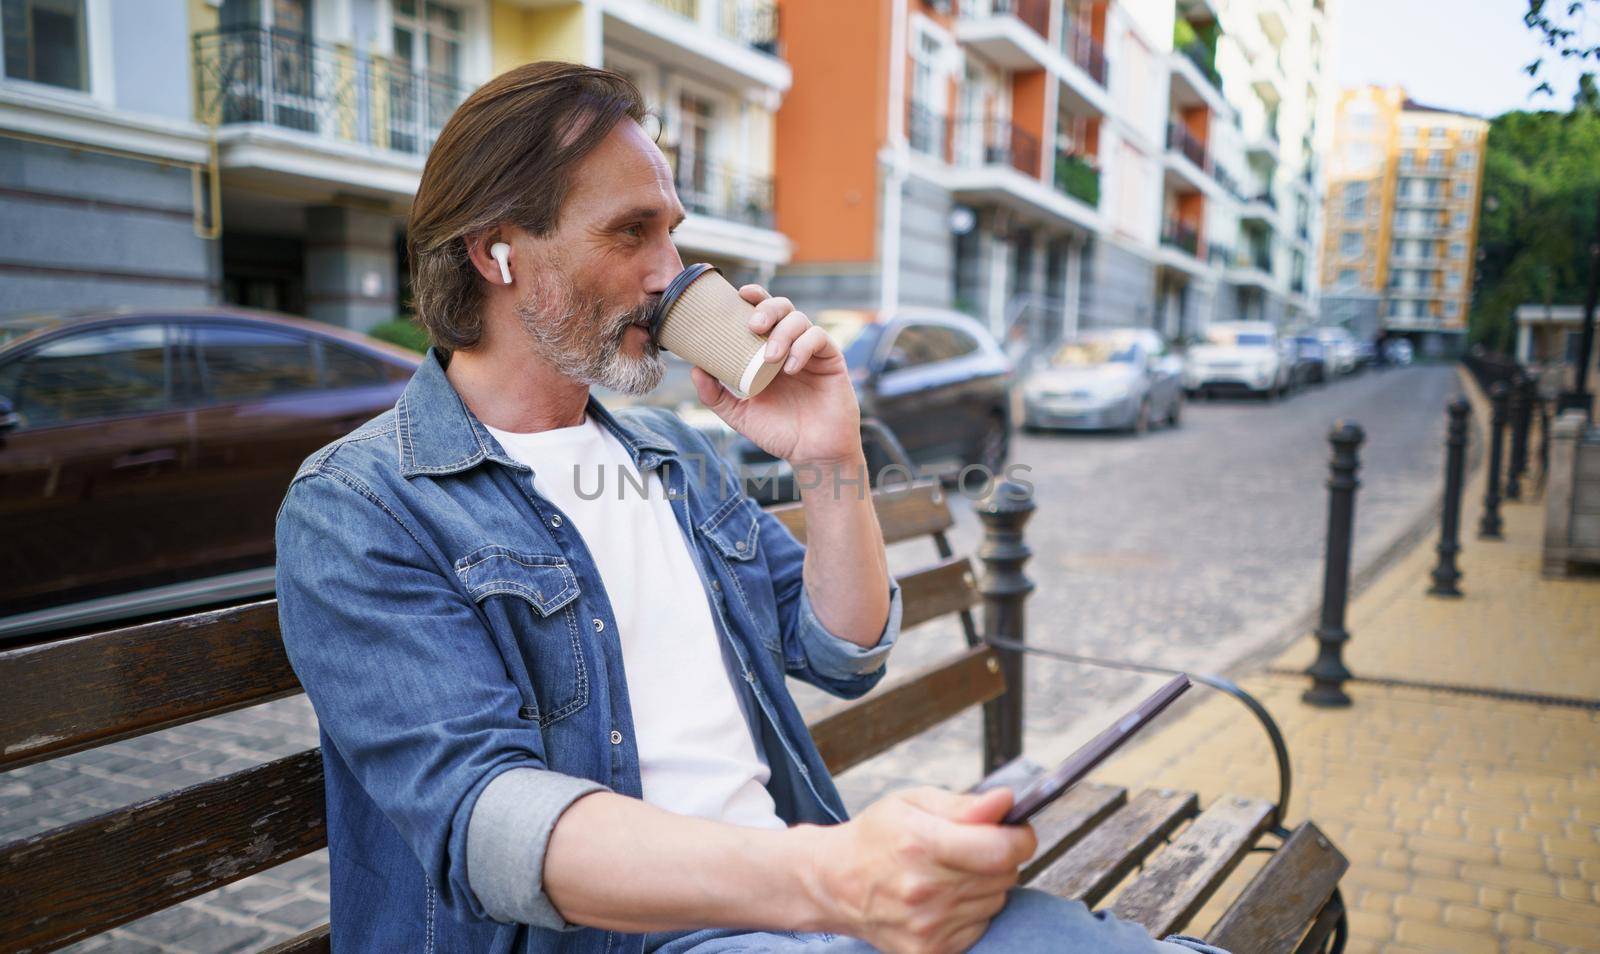 Sitting alone on the bench middle aged man away of office holding digital tablet, wireless earphones having a call drinking take away coffee at old town streets. Business on the go concept by LipikStockMedia